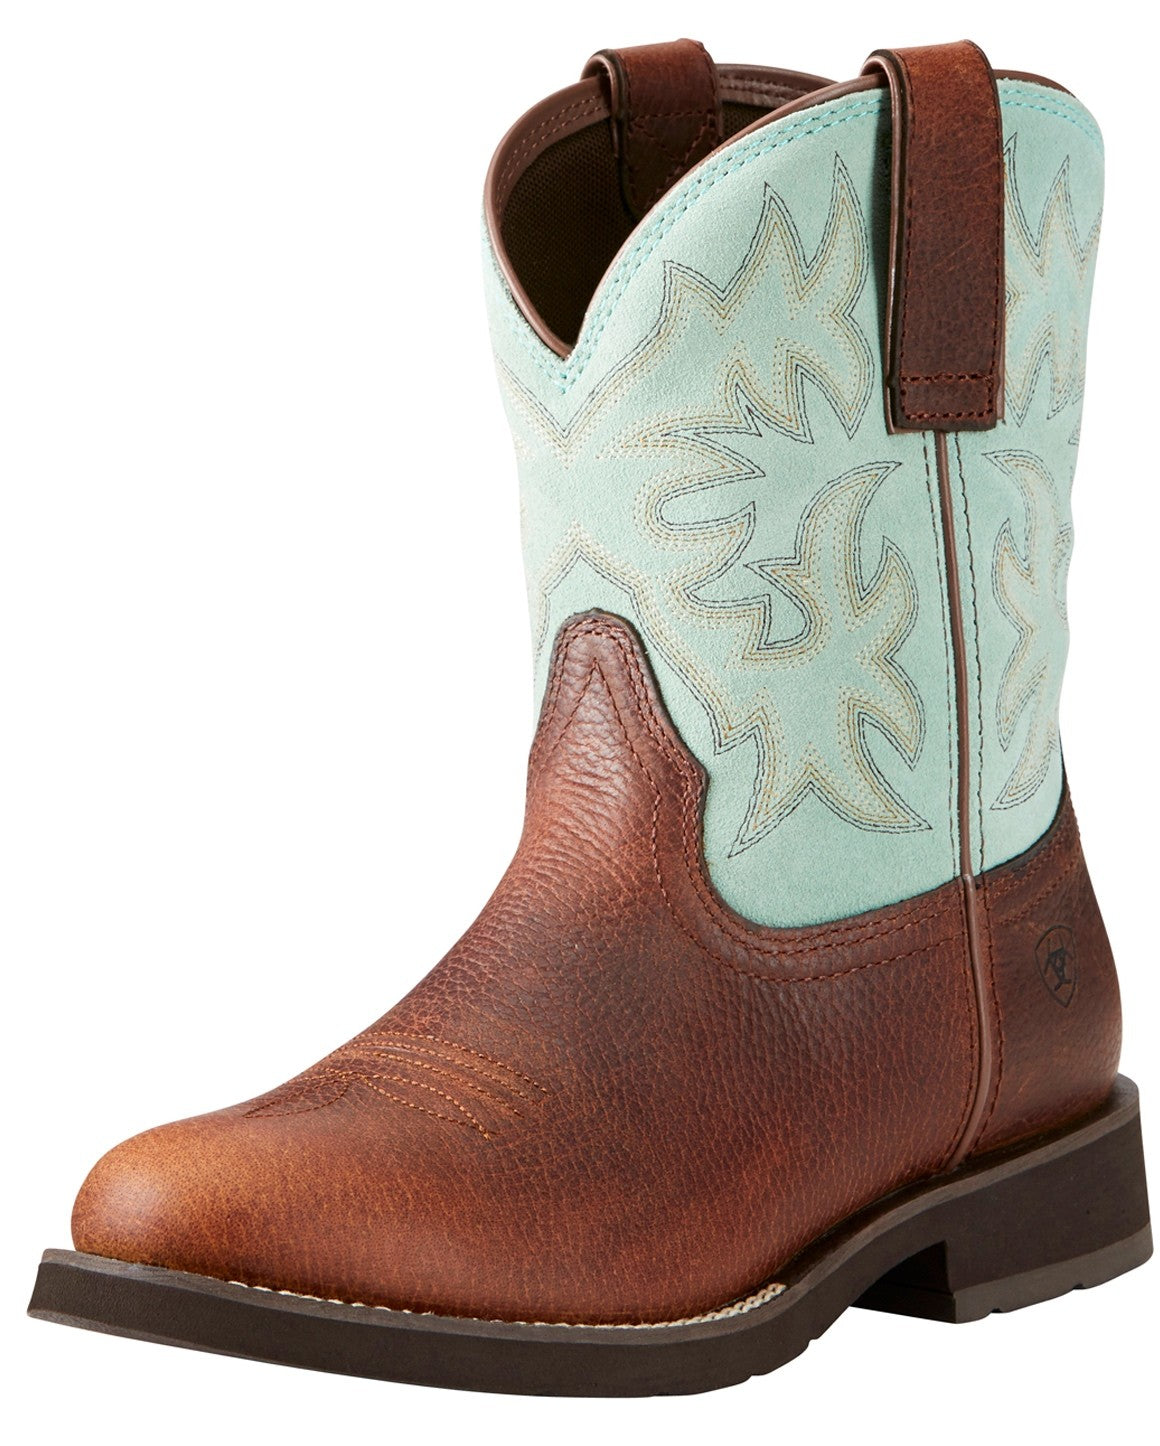 Ariat® Women's Lilly Roper Cowboy Boots